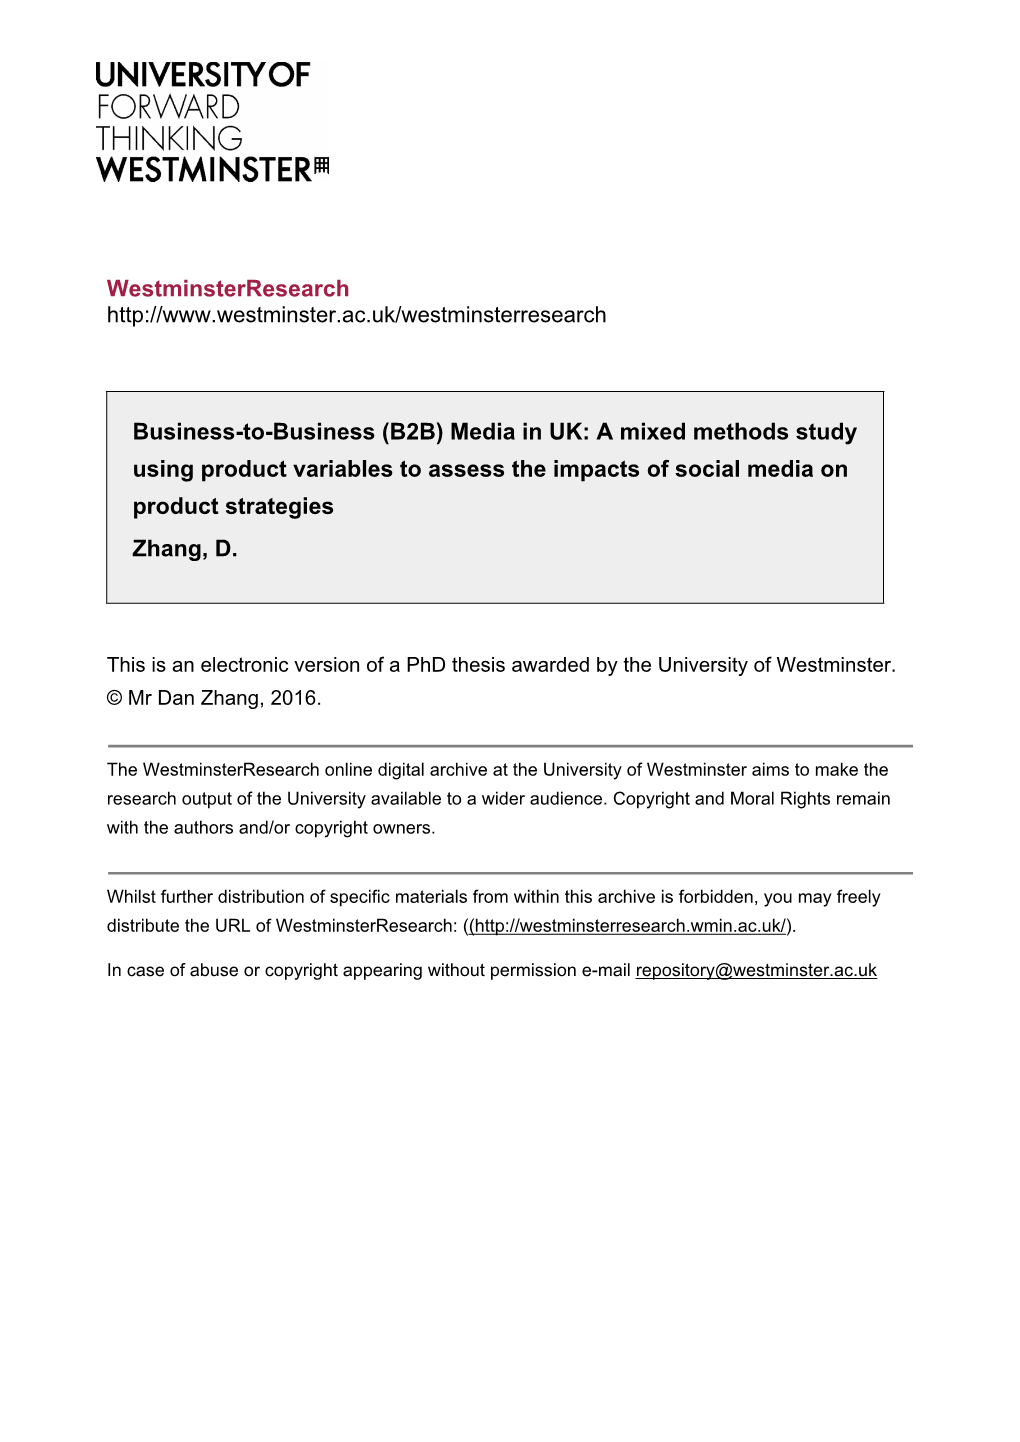 B2B) Media in UK: a Mixed Methods Study Using Product Variables to Assess the Impacts of Social Media on Product Strategies Zhang, D